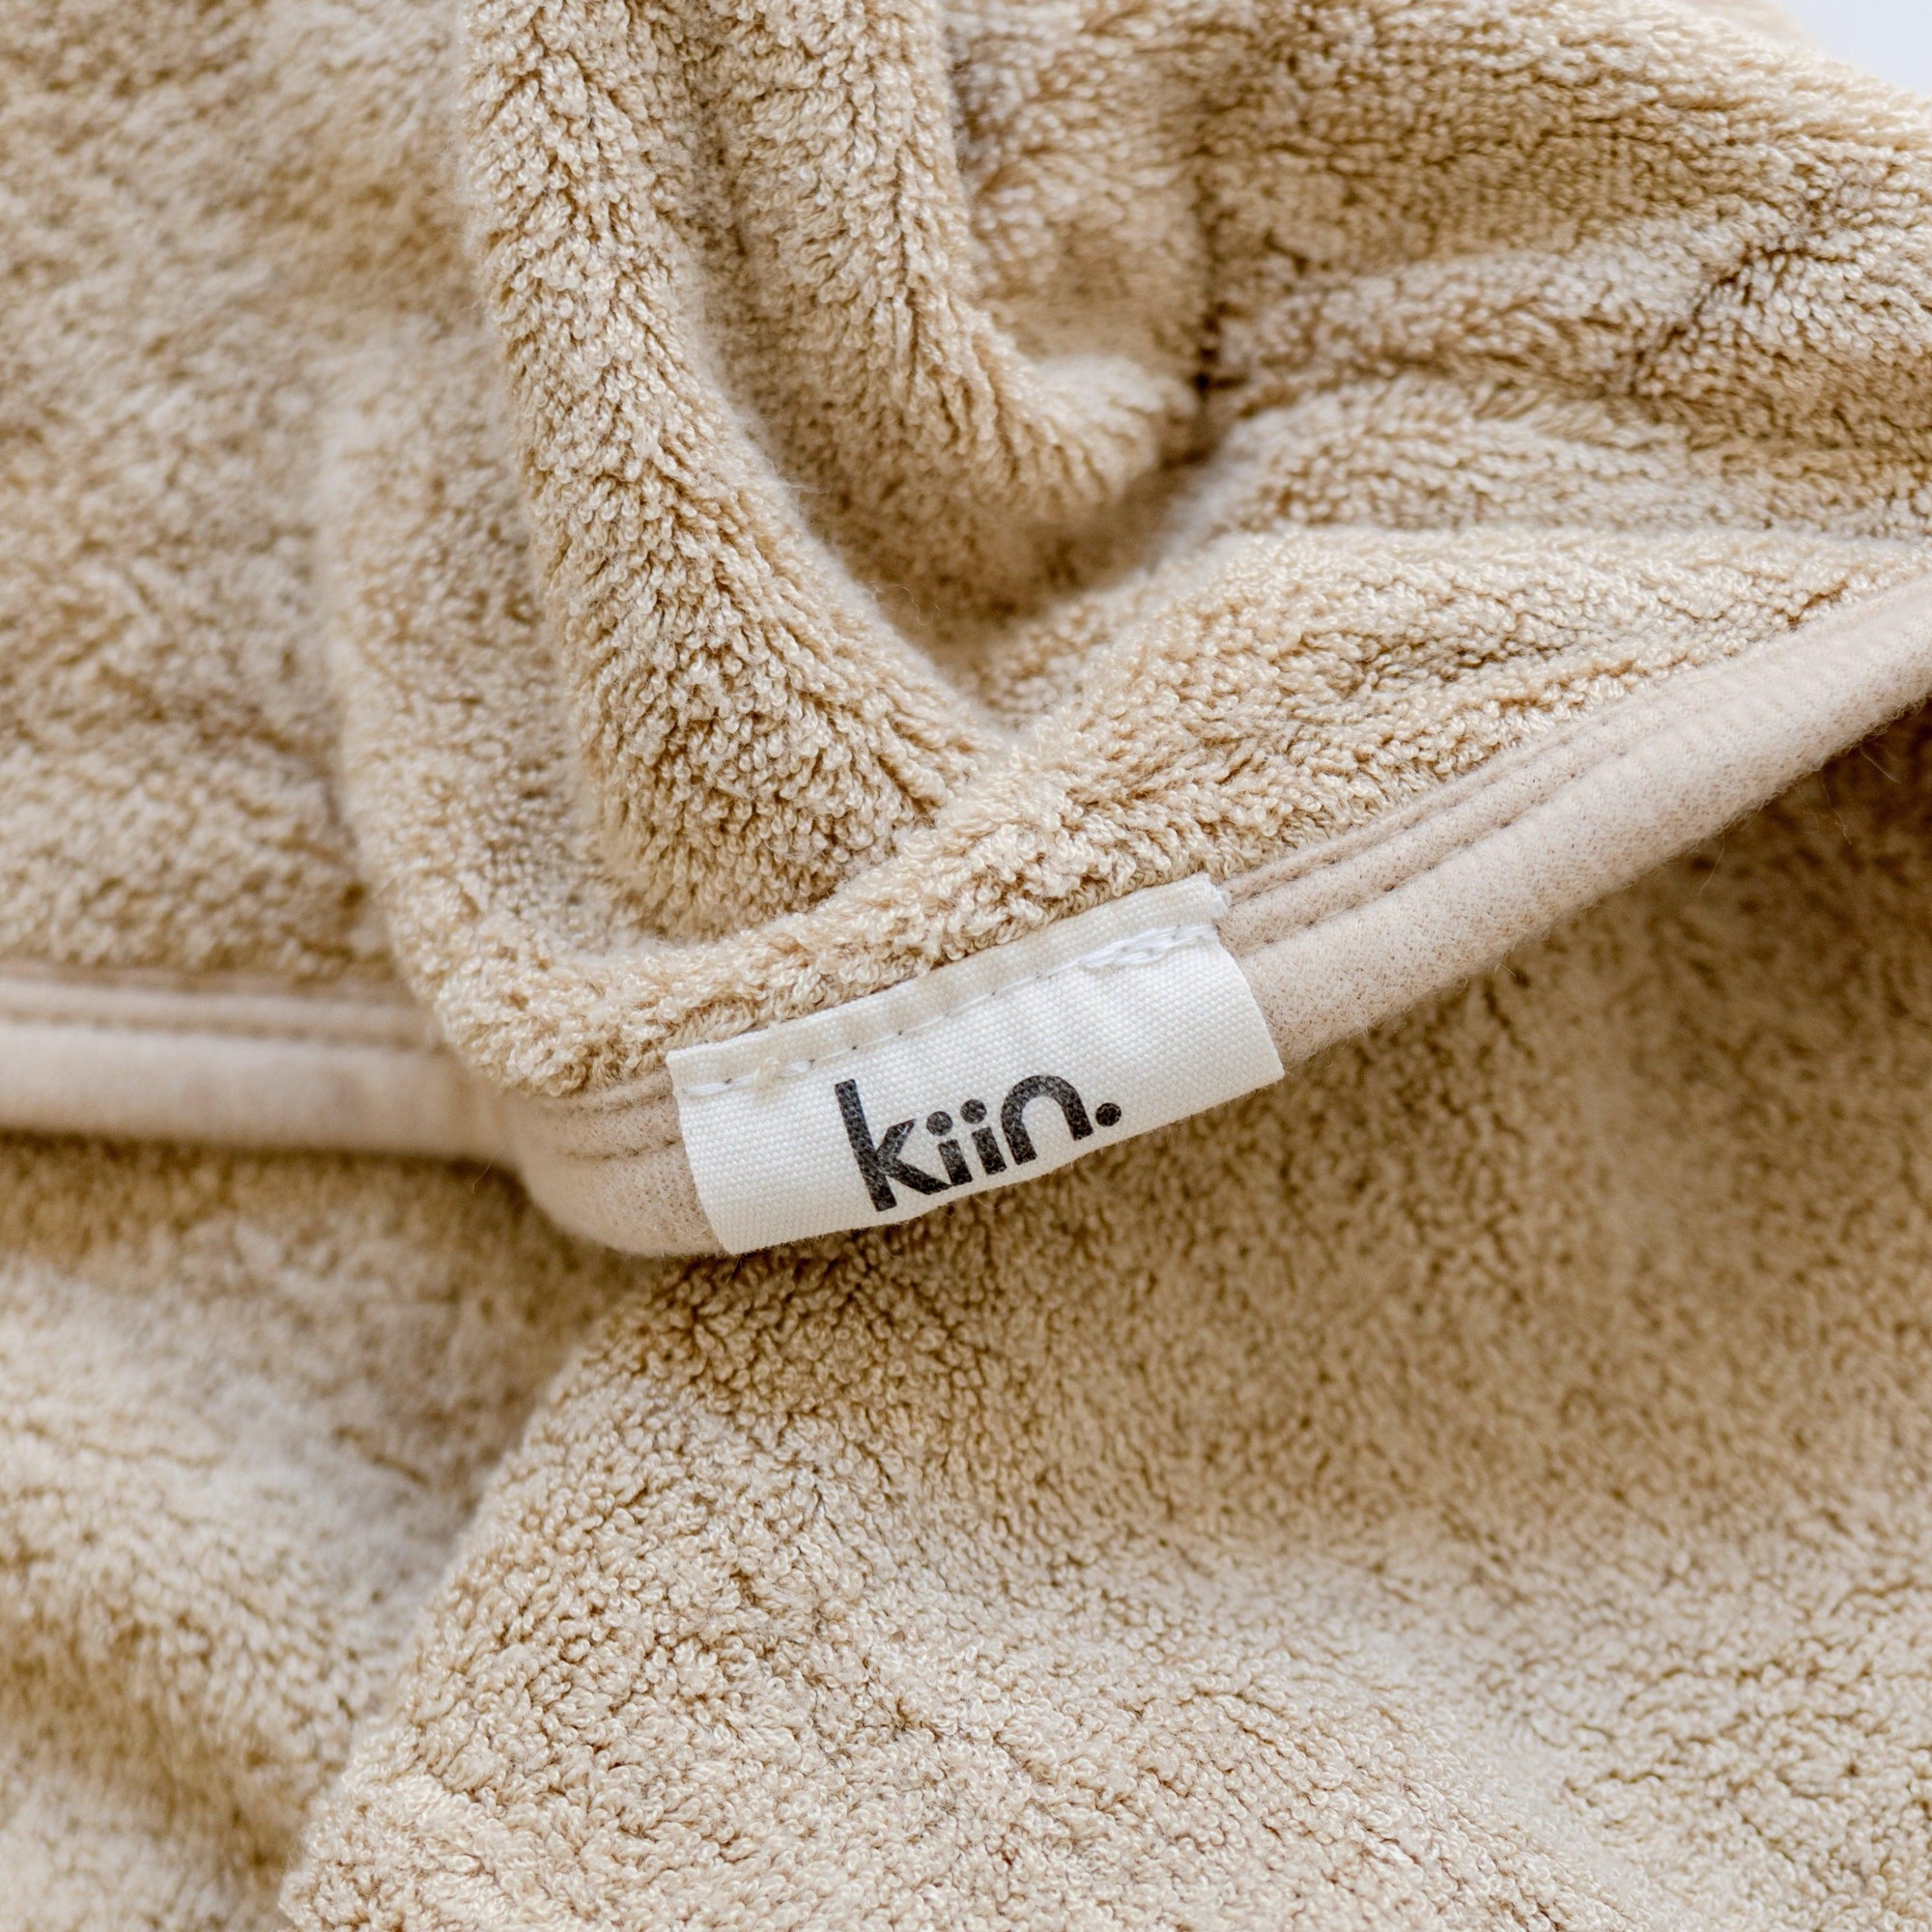 The Kiin Baby hooded towel is a bath time essential. It is both larger & thicker than most other baby towels on the market; made in a super soft, and luxuriously thick 600gsm cotton & bamboo blend, and measuring 90cm x 90cm.